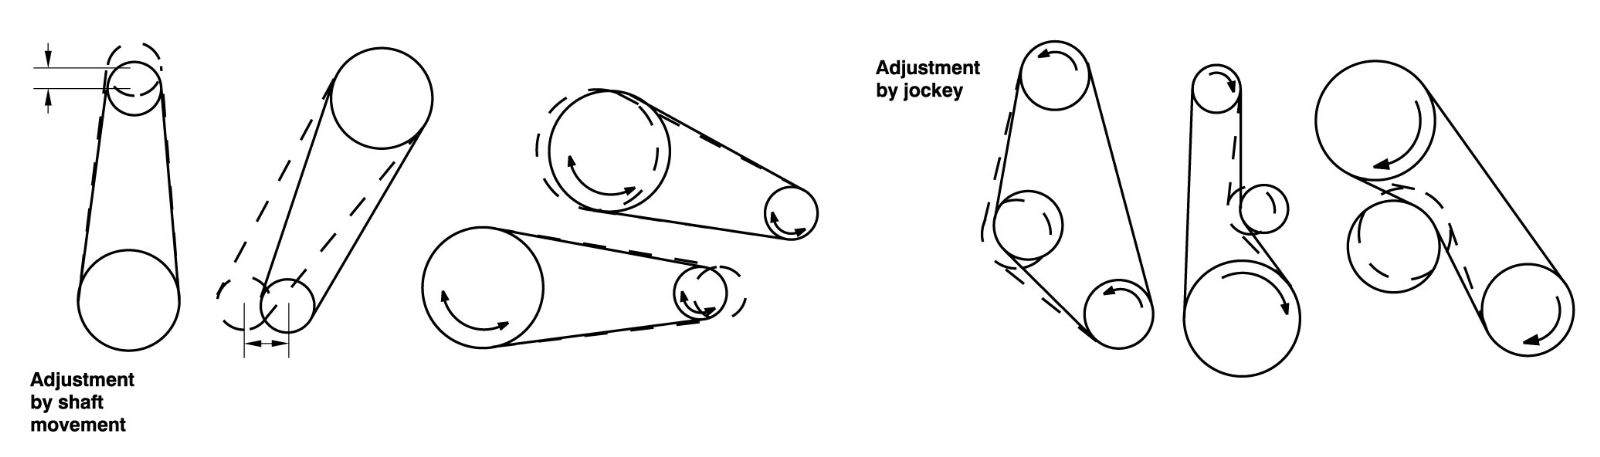 vision_chain_chain_adjustment_by_shaft_movement_and_jockey